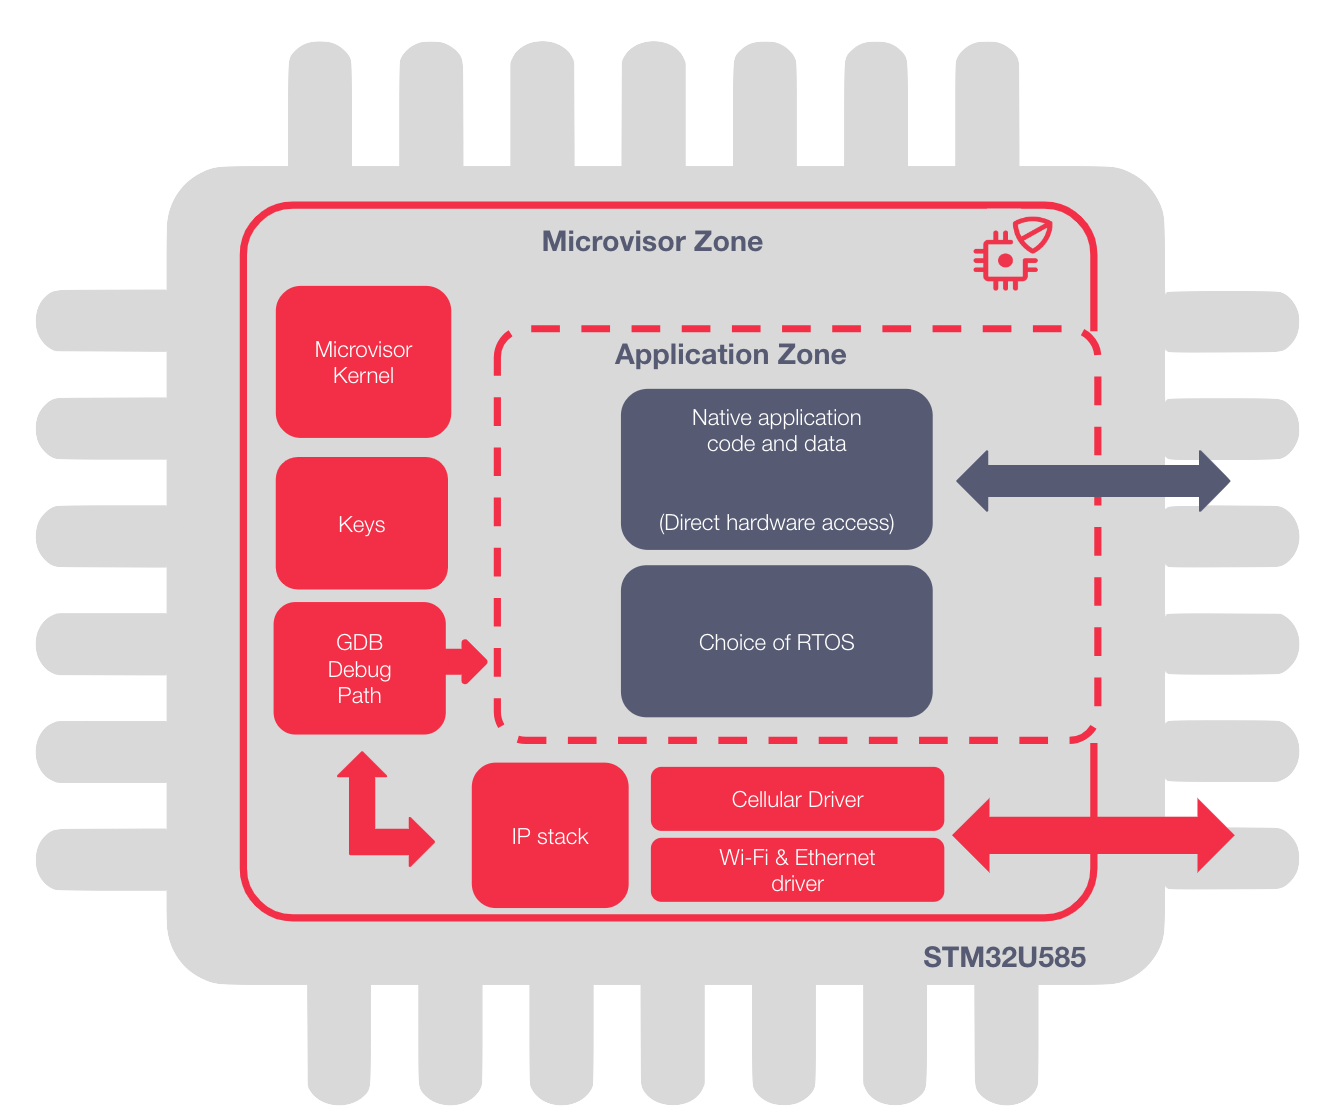 Microvisor components in red remain functional even when the application firmware is not running.